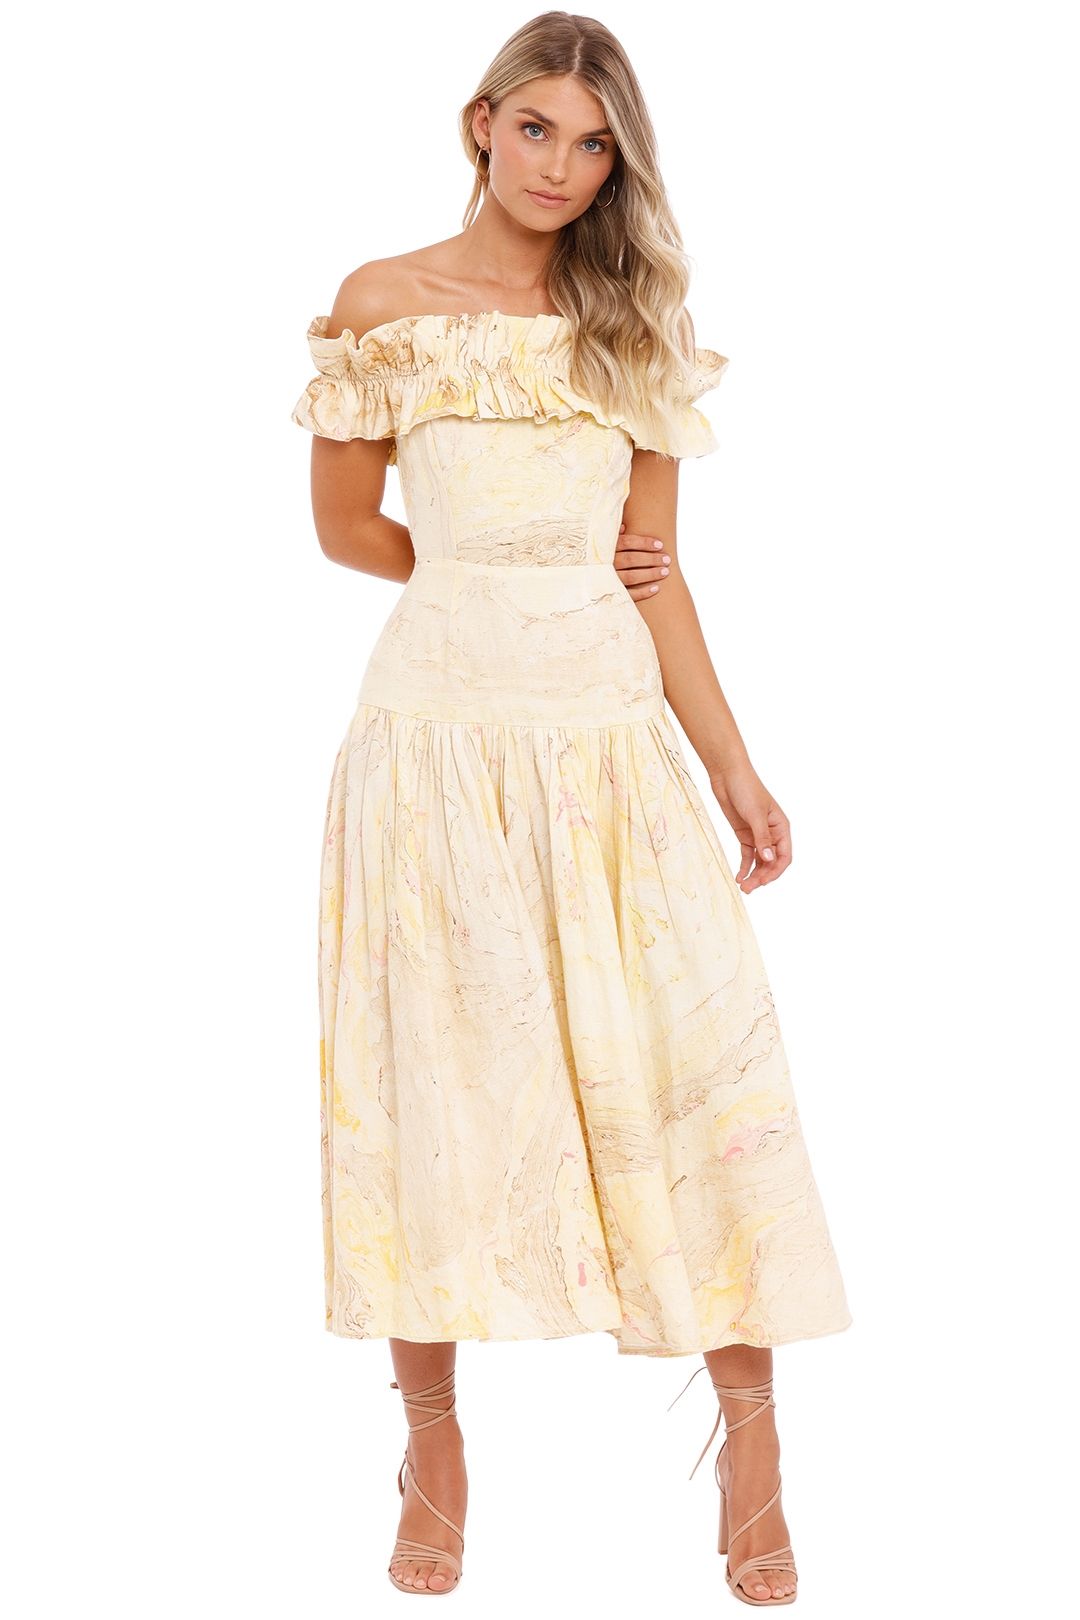 Cosmos Frill Dress in Lemon Alemais yellow